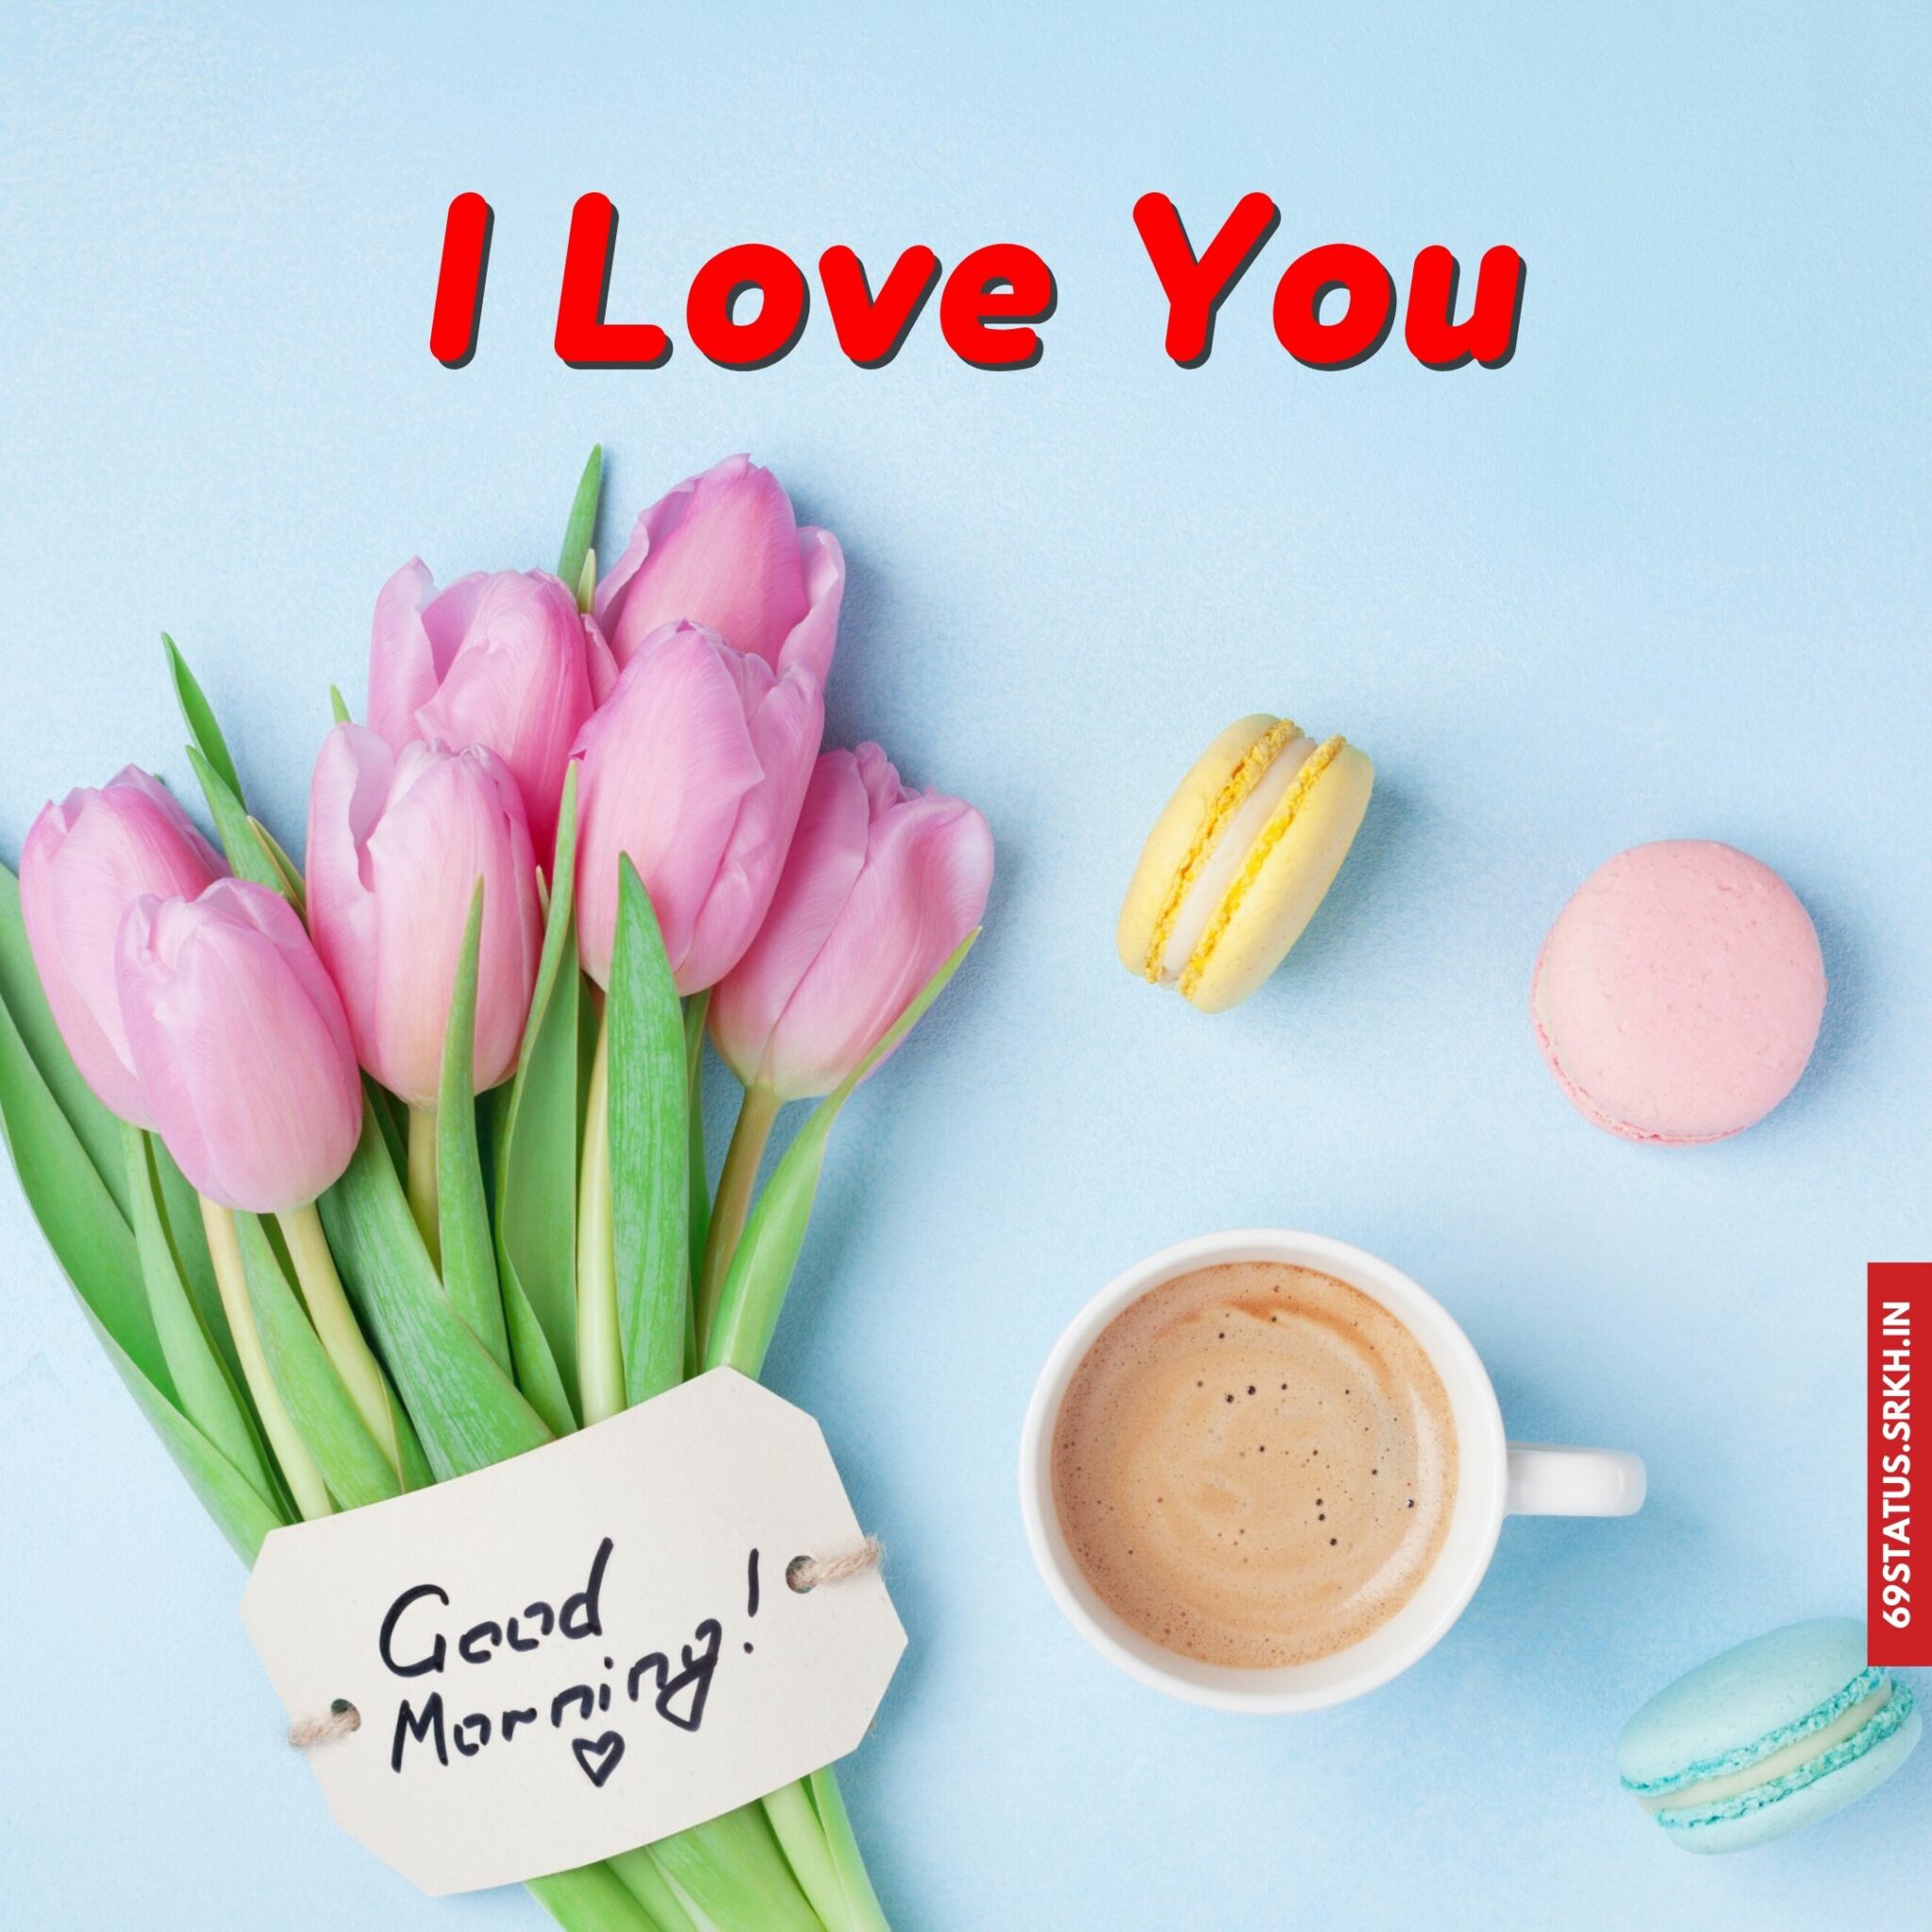 I Love You good morning images